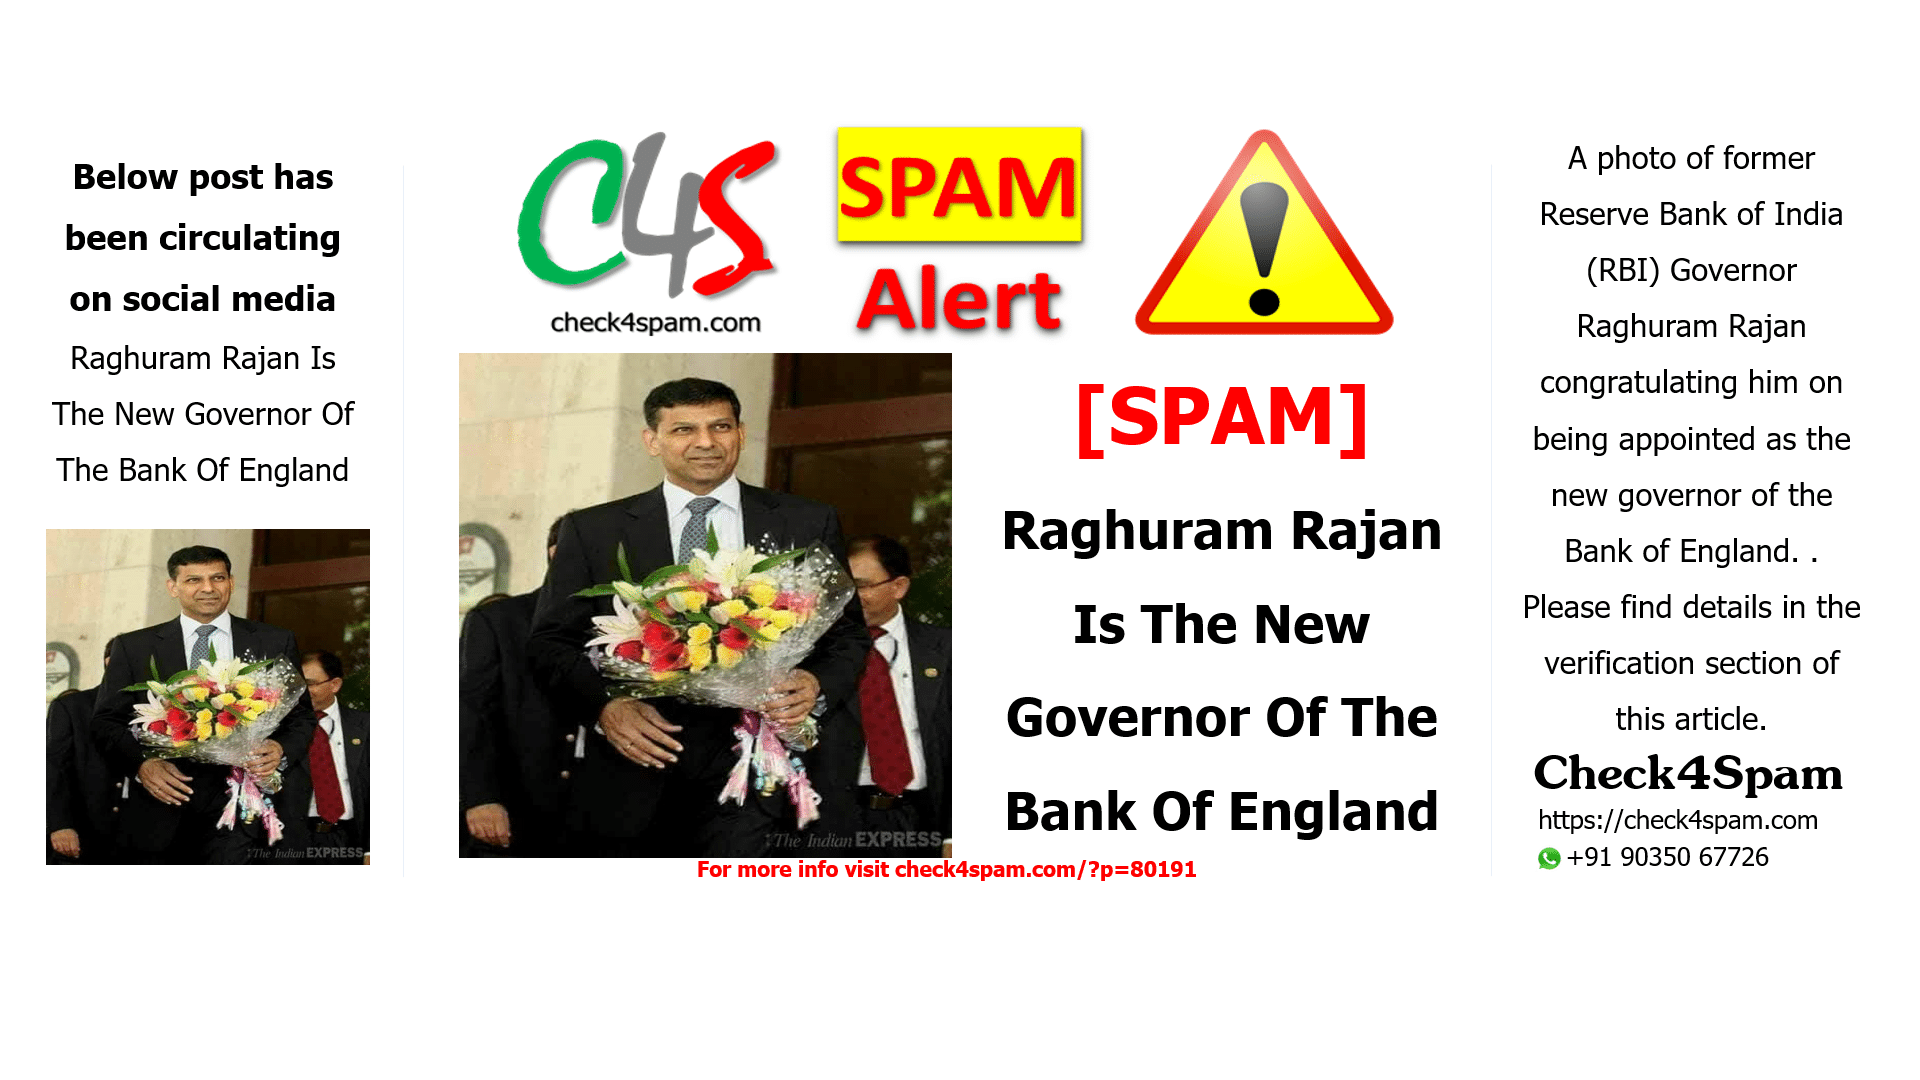 https://www.altnews.in/fake-news-claims-raghuram-rajan-appointed-governor-of-bank-of-england/